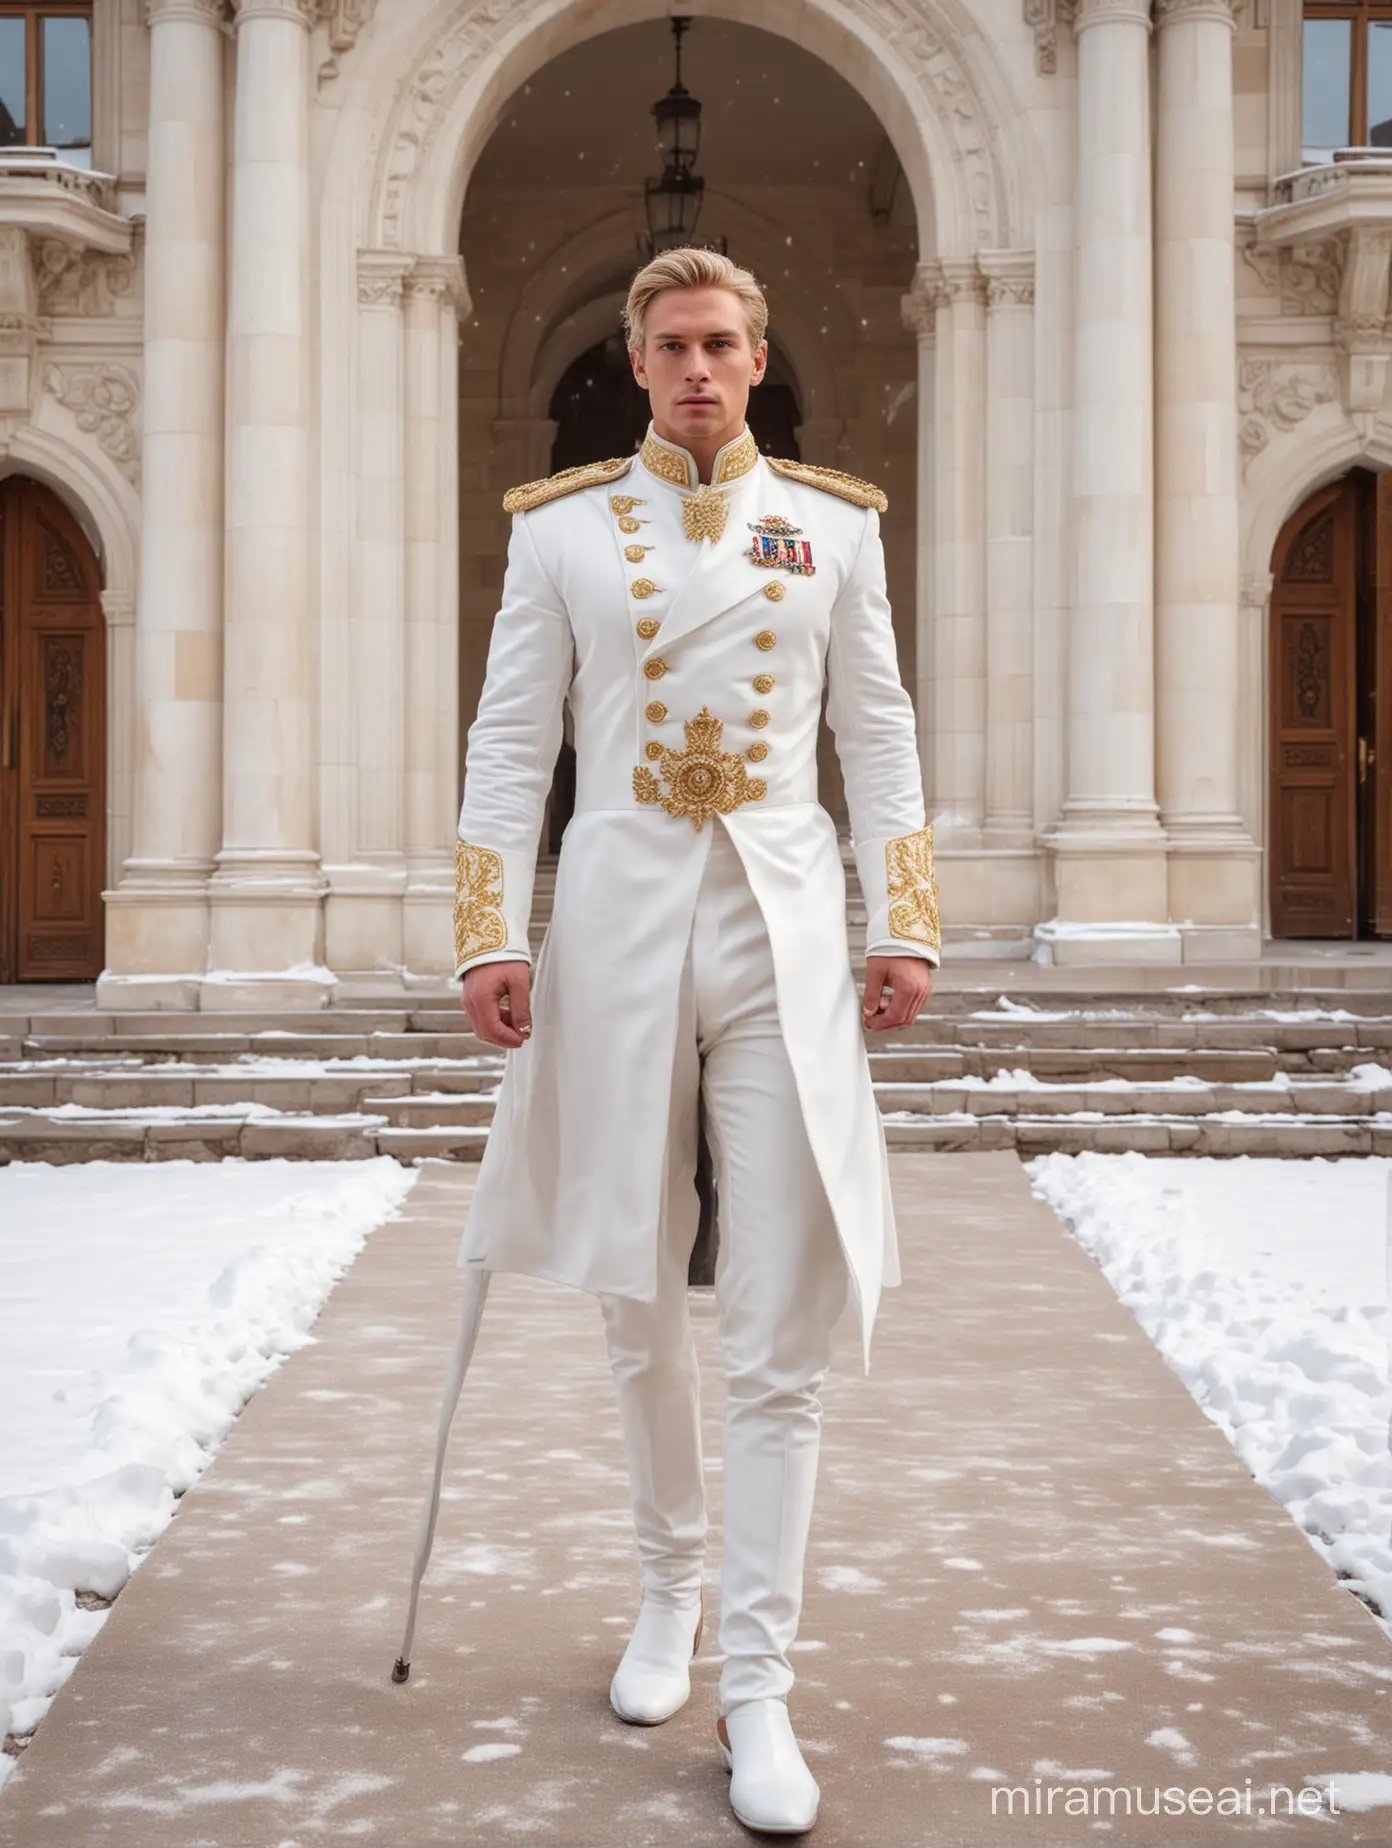 Tall and handsome muscular king with beautiful blonde hairstyle and with attractive eyes and Big wide shoulder in white cavalry suit with Coat walking out on carpet outside snowy palace